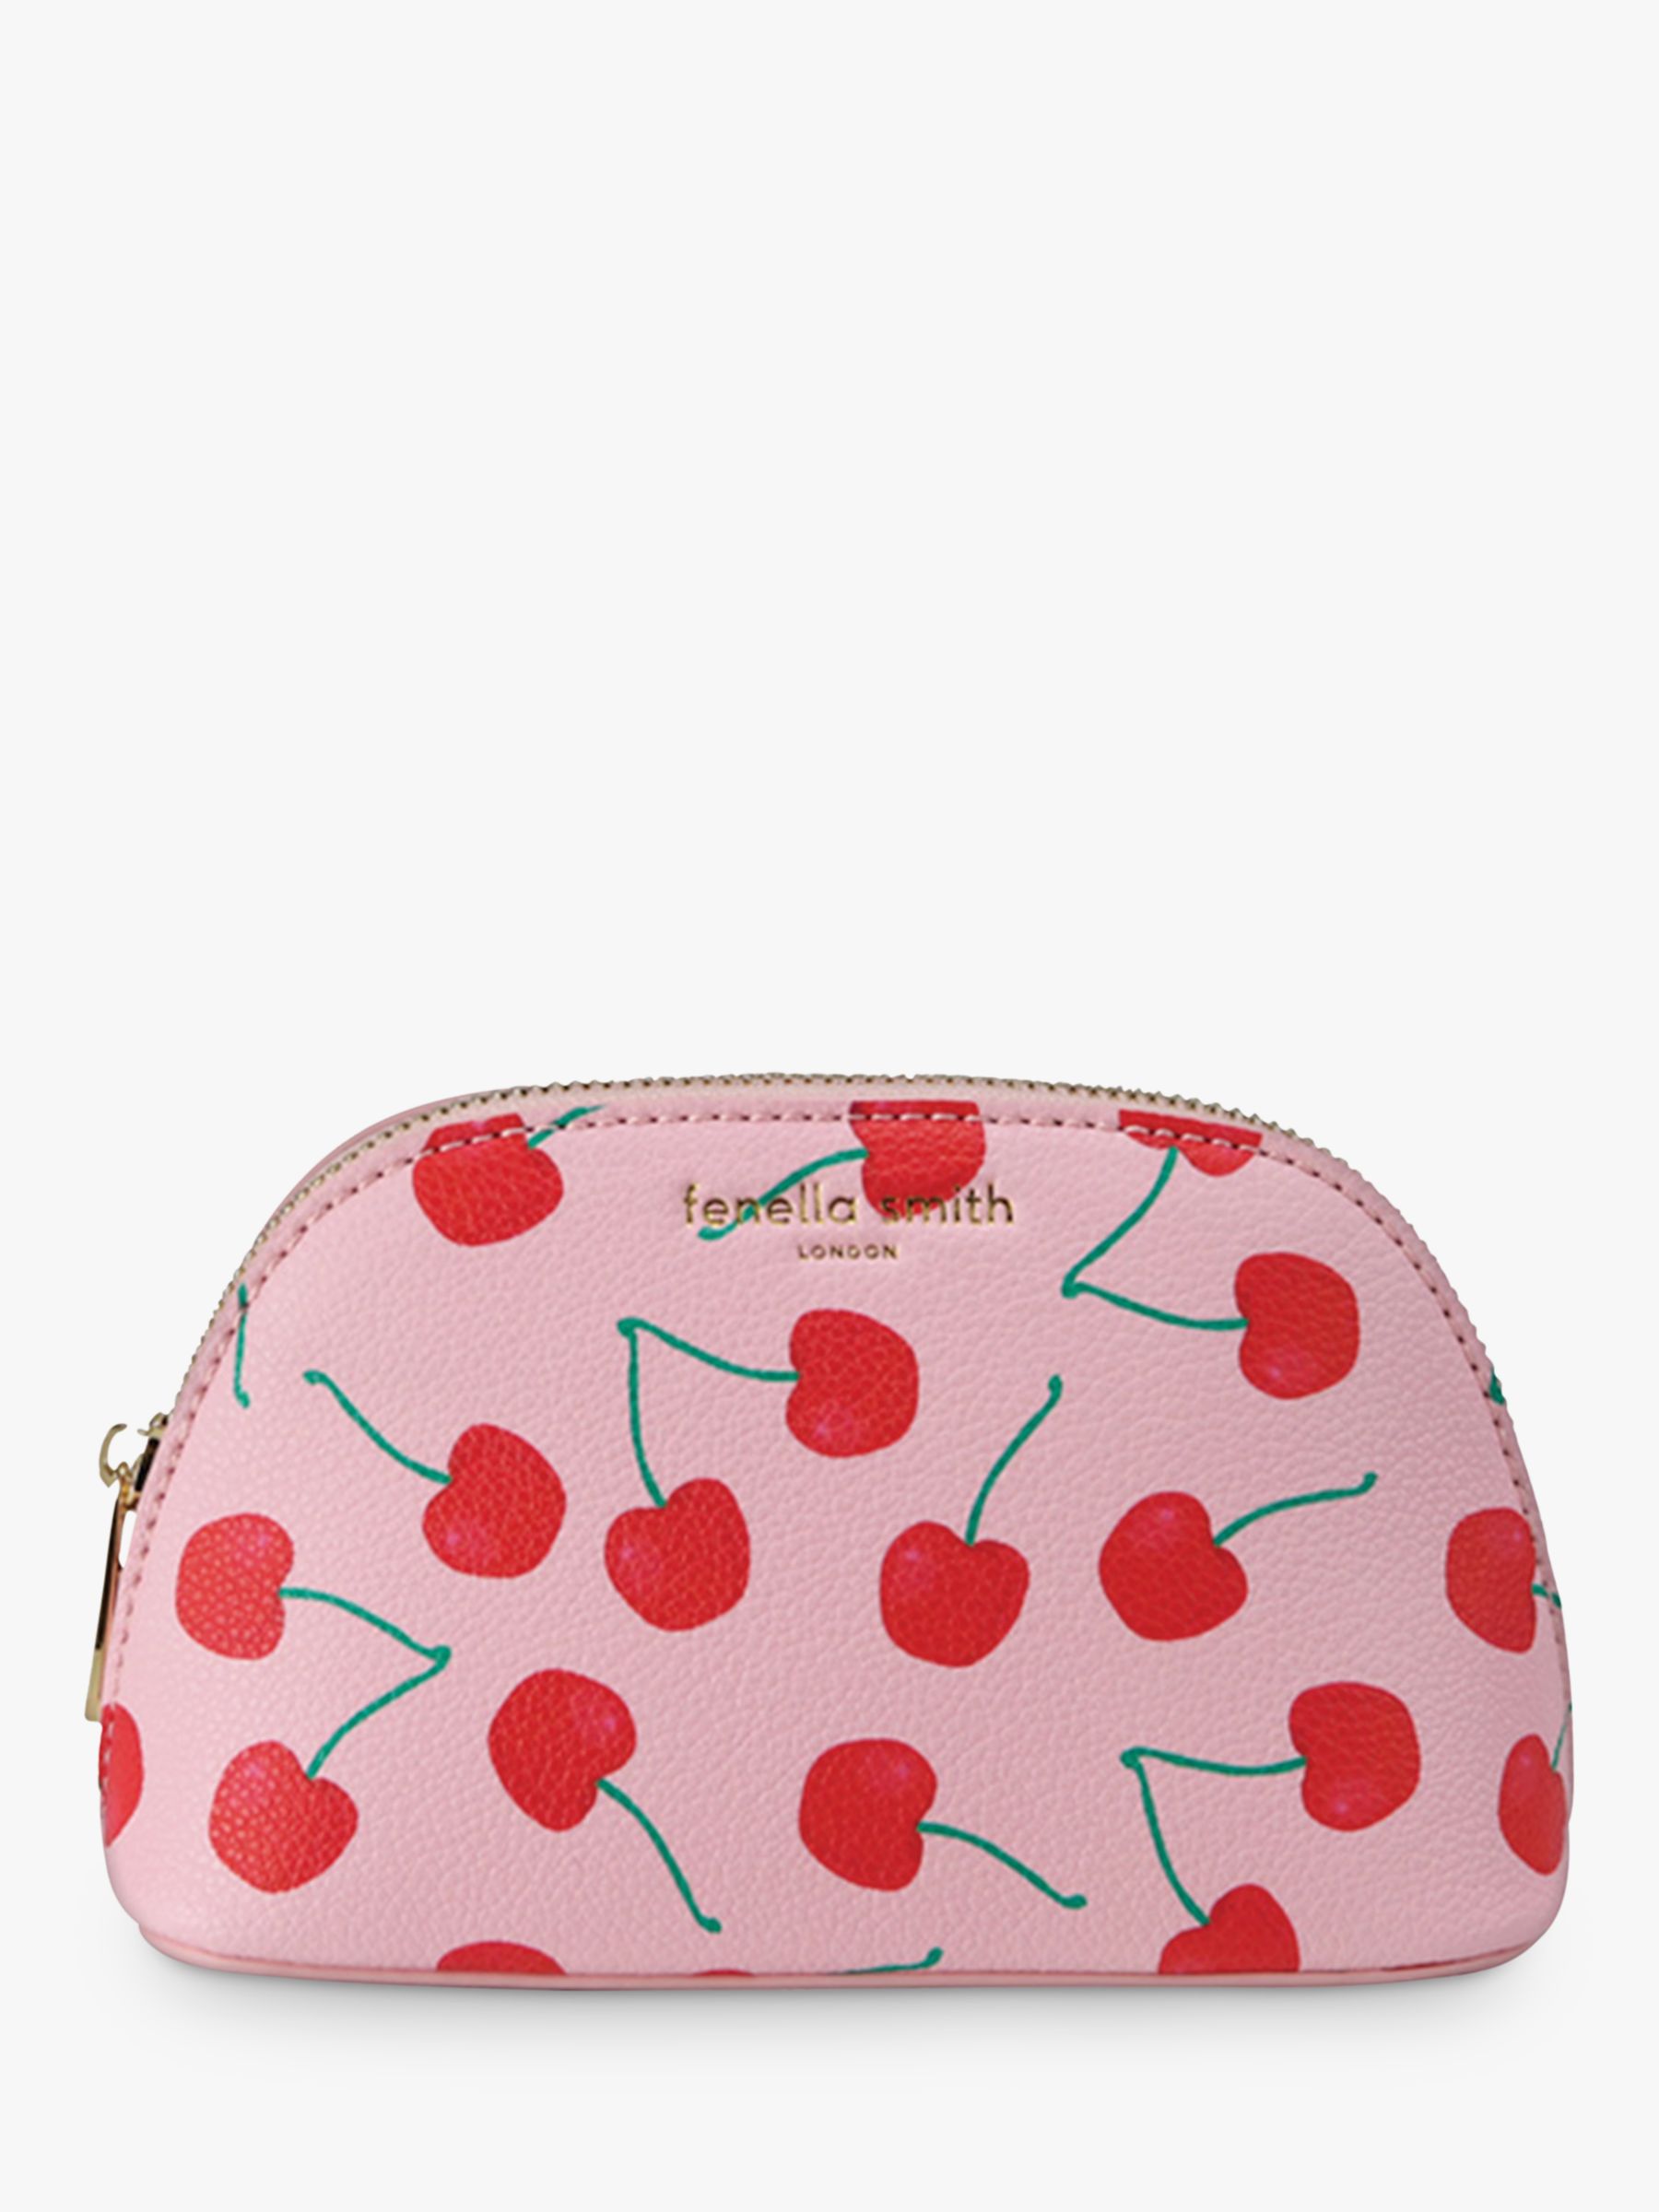 Fenella Smith Cherries Recycled Make Up Bag, Pink 1